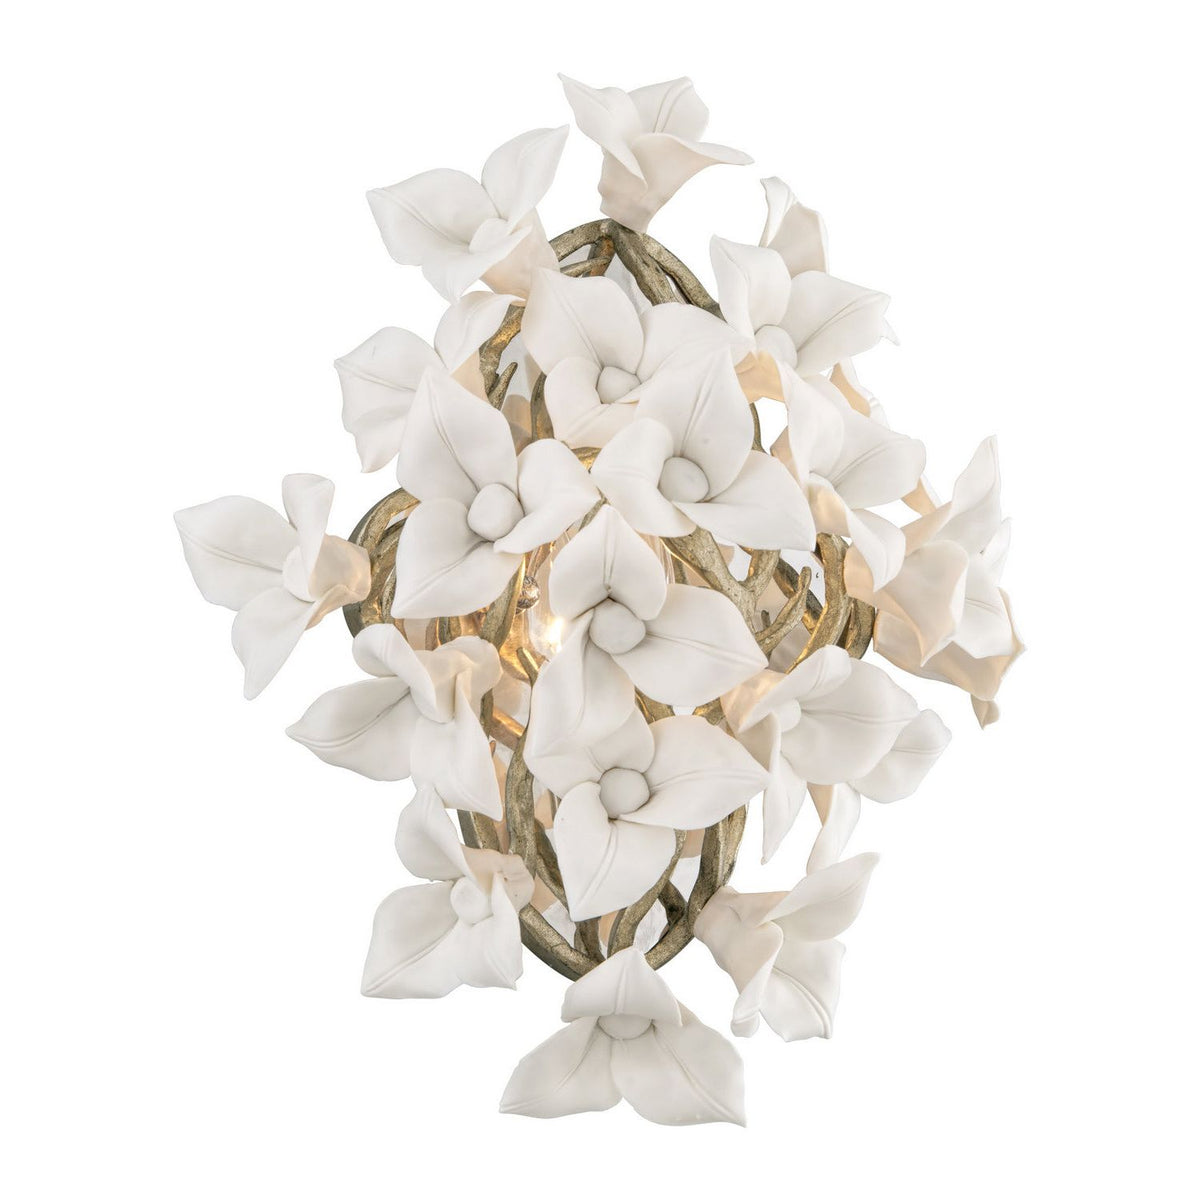 Corbett Lighting - 211-12-SGL - One Light Wall Sconce - Lily - Enchanted Silver Leaf